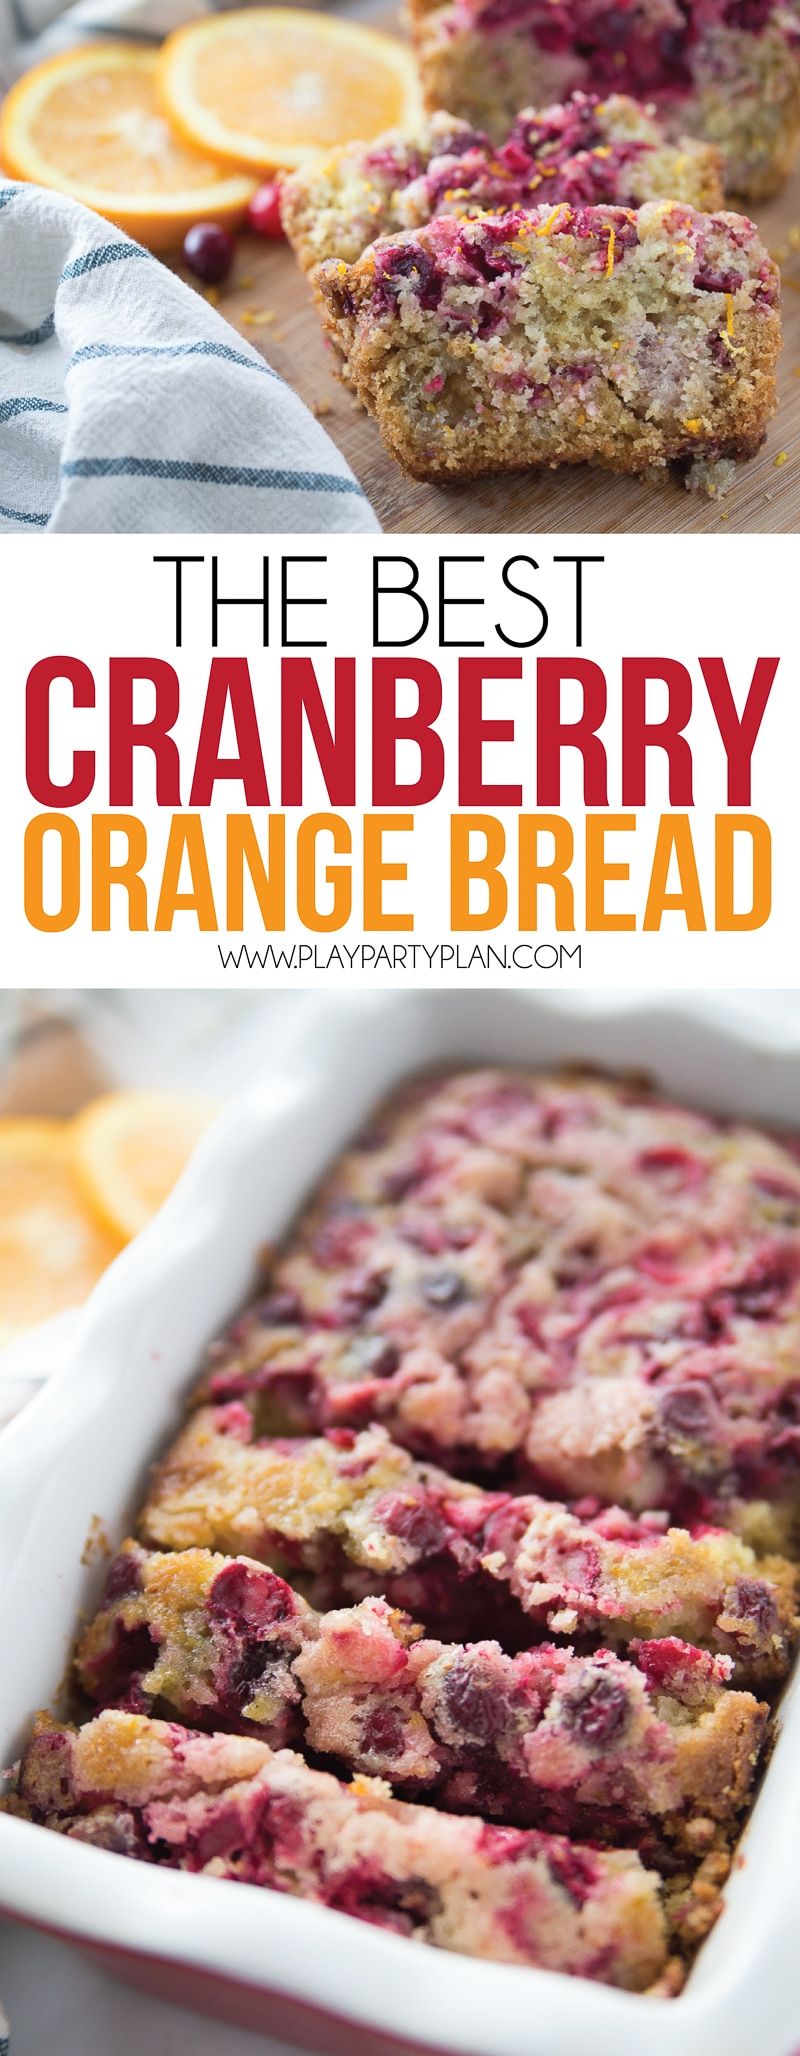 This is the best cranberry orange bread recipe! It’s easy to make, incredibly moist, and delicious whether you make it in mini loaves, muffins, or regular loaves! Just make sure to make double because it’ll be gone in minutes!